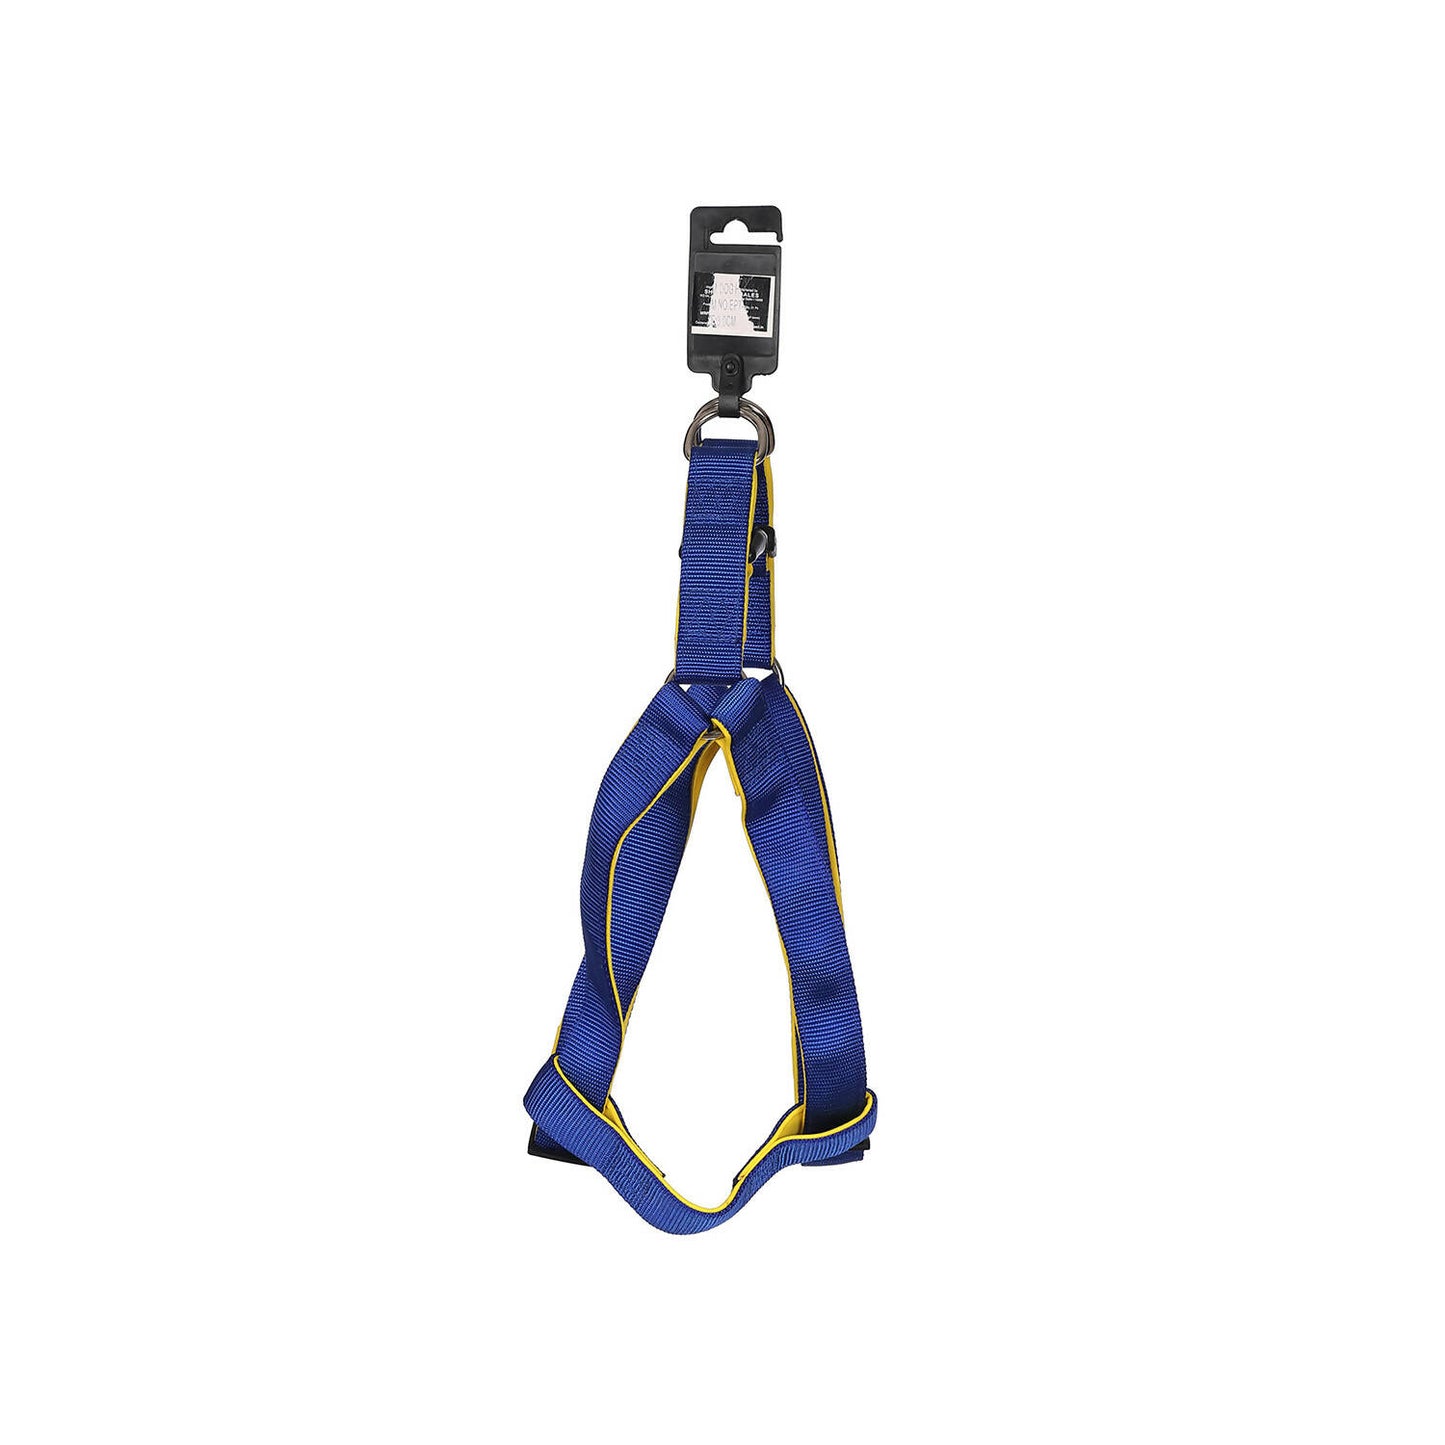 Basil - Padded Harness For Dogs